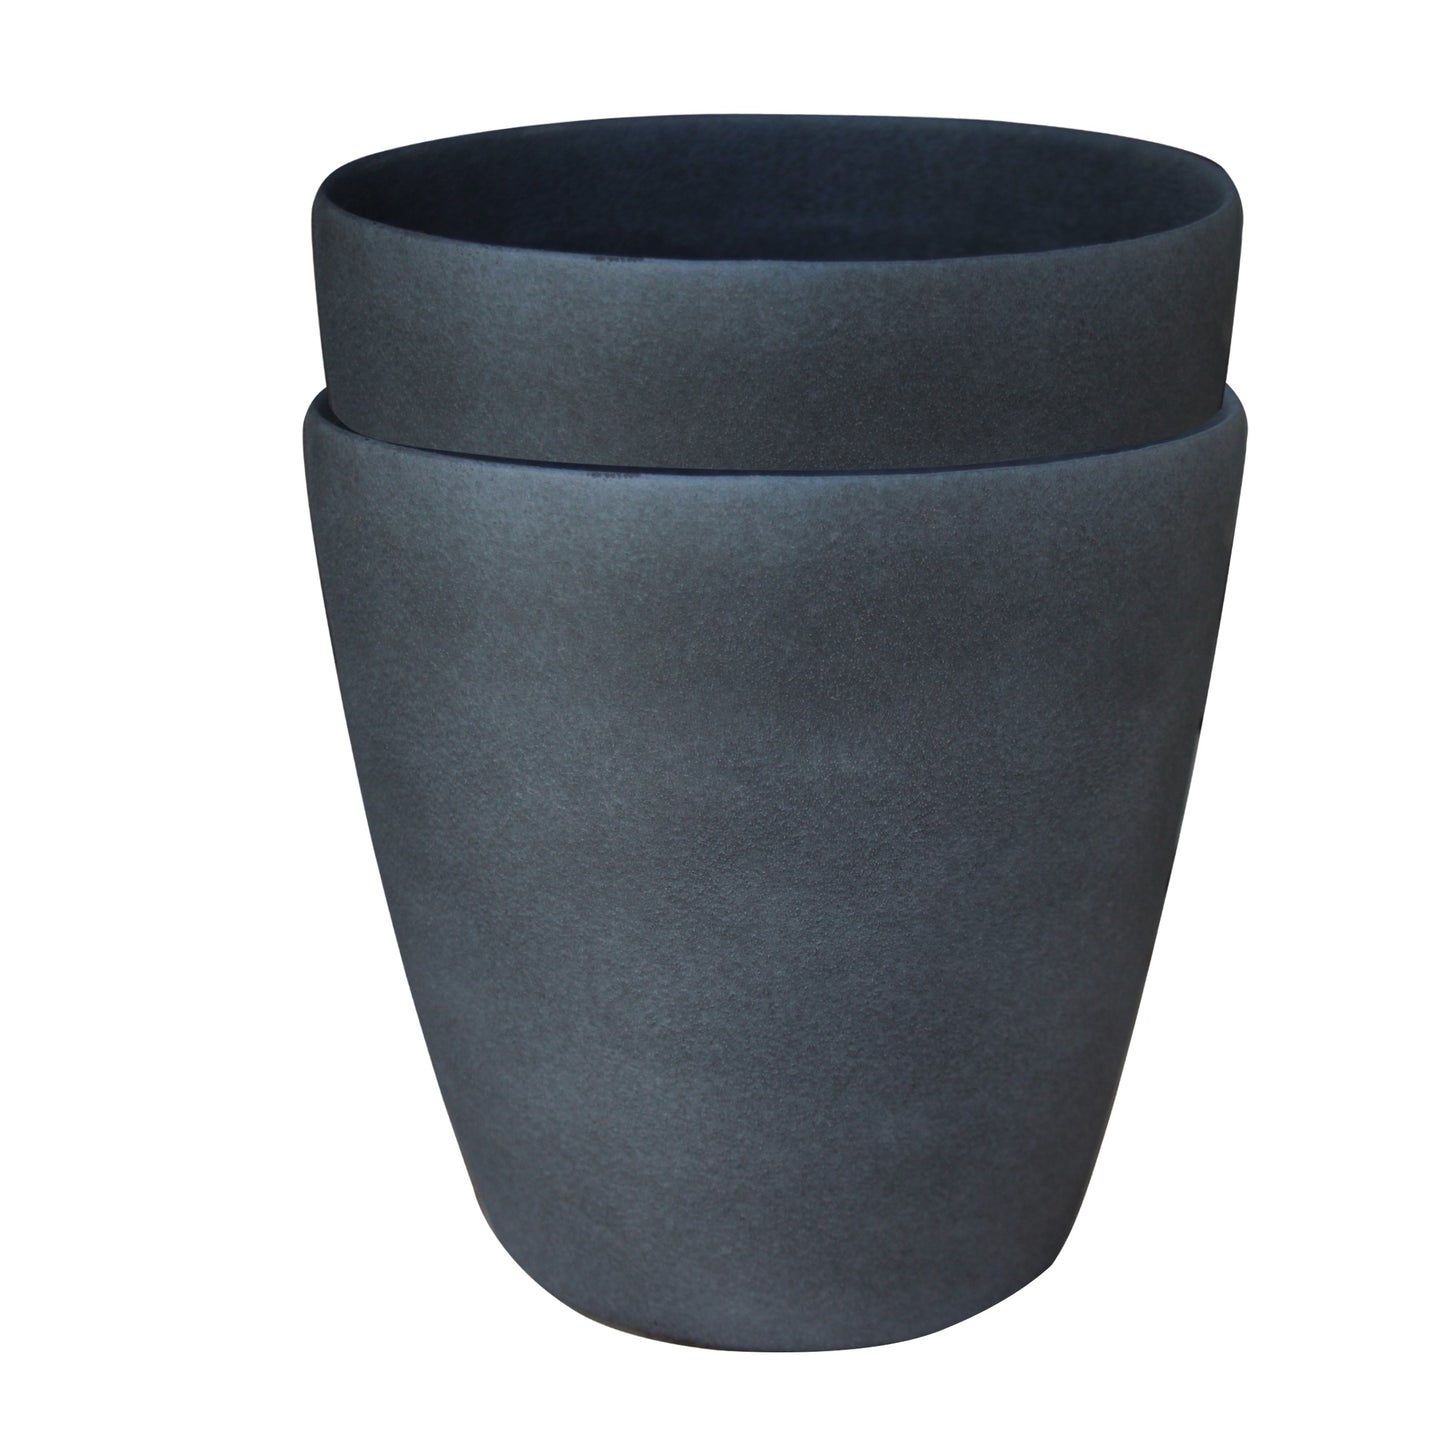 Set of 2 round planters (8 colors)